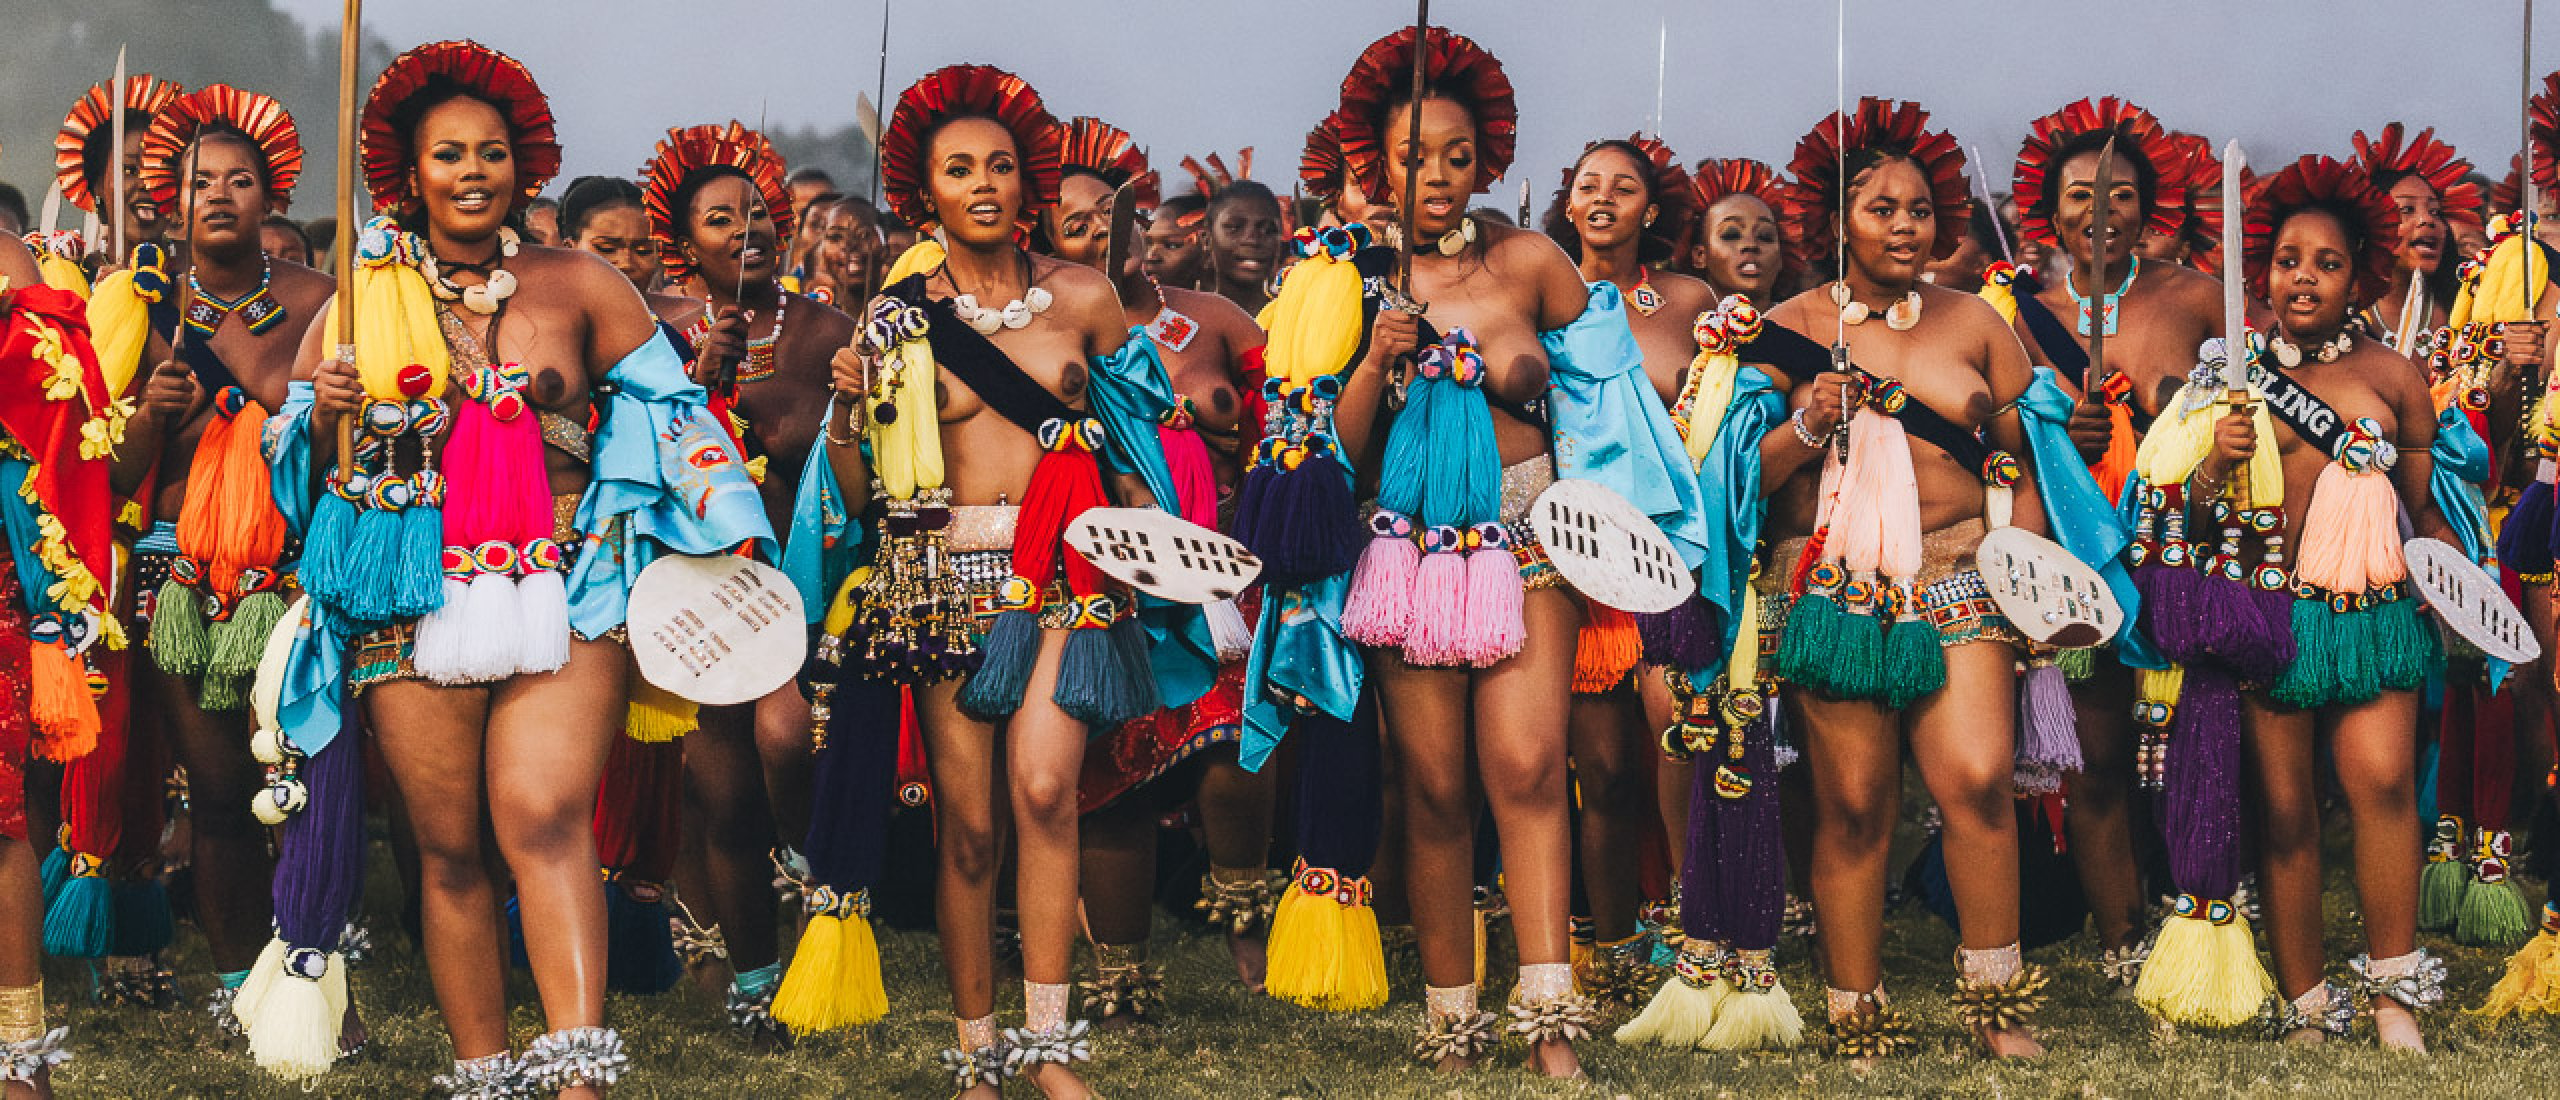 Everything you need to know about the Umhlanga Reed Dance Festival in Eswatini (Swaziland)